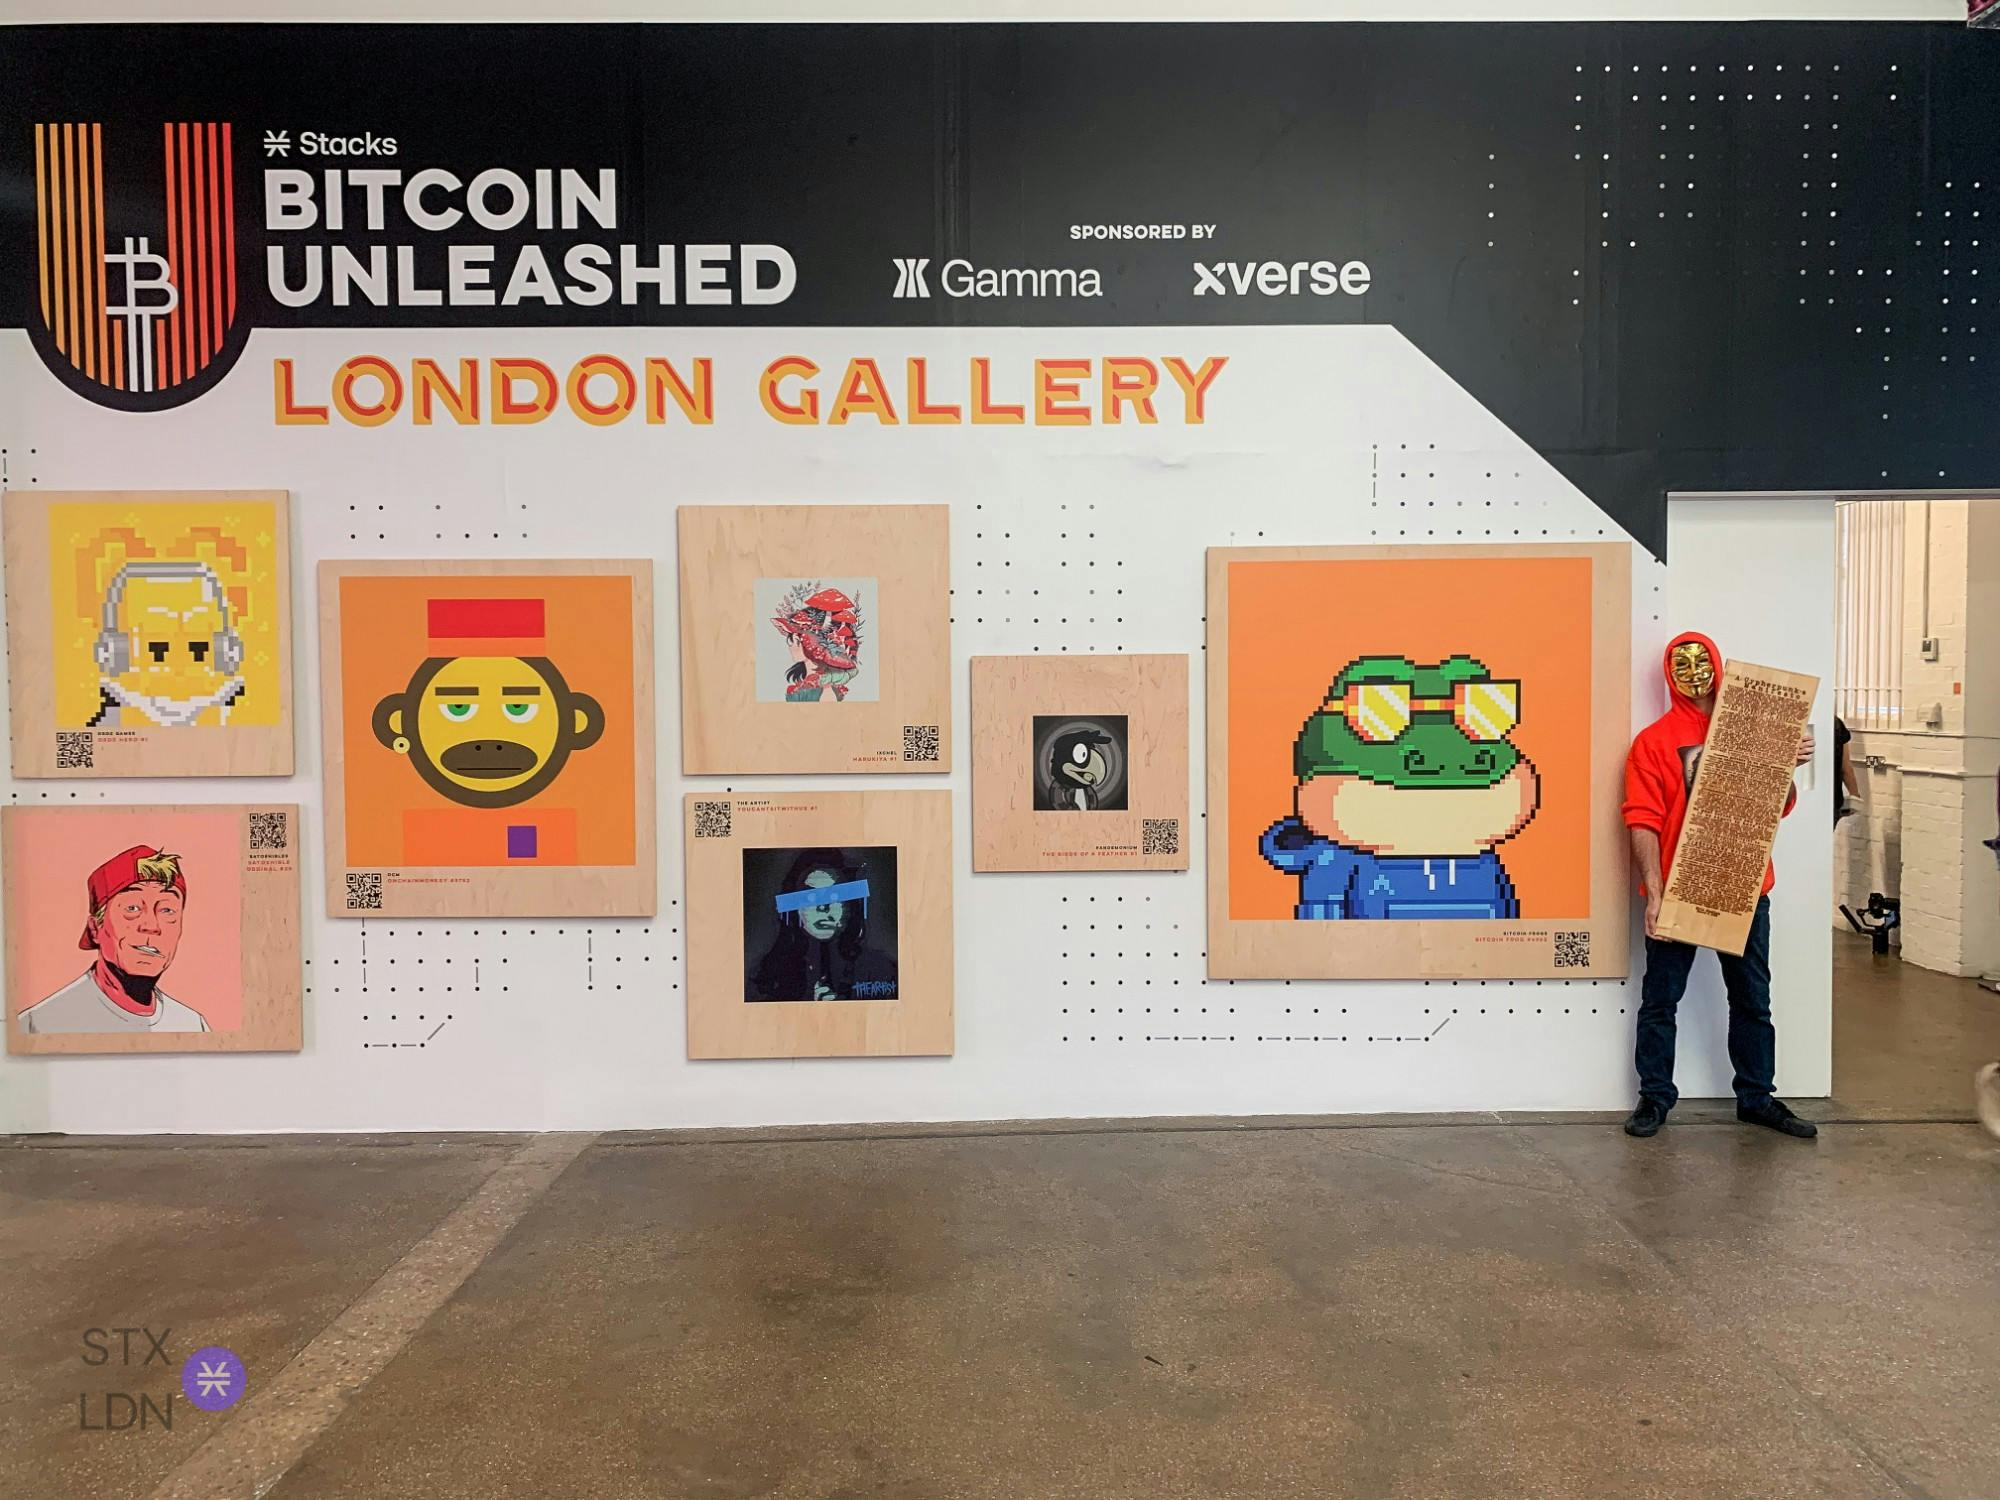 Bitcoin Unleashed London: Community Review